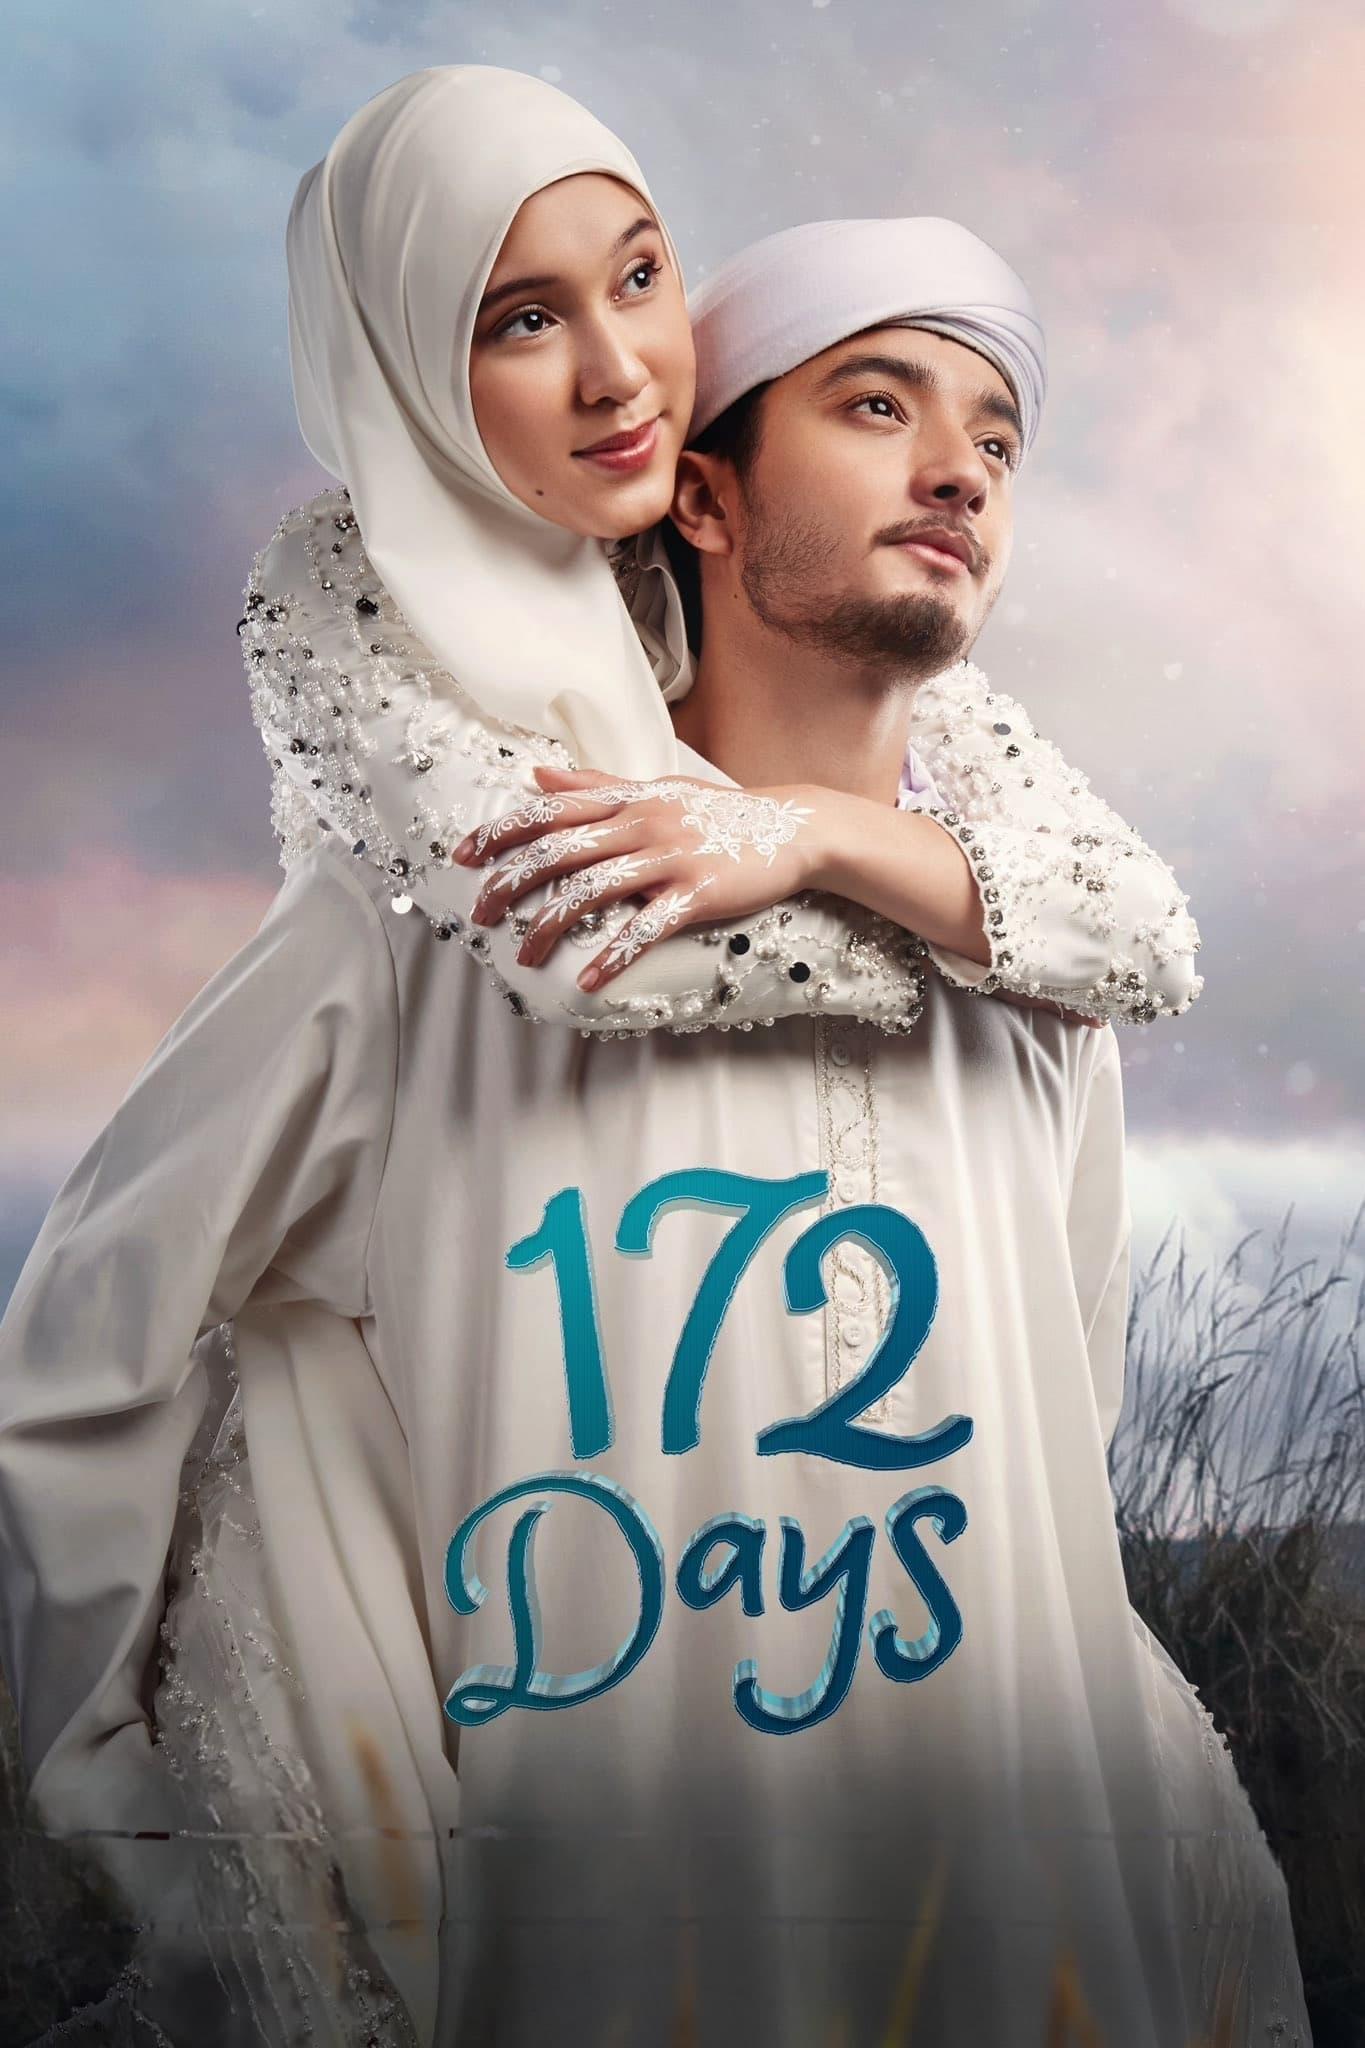 172 Days poster